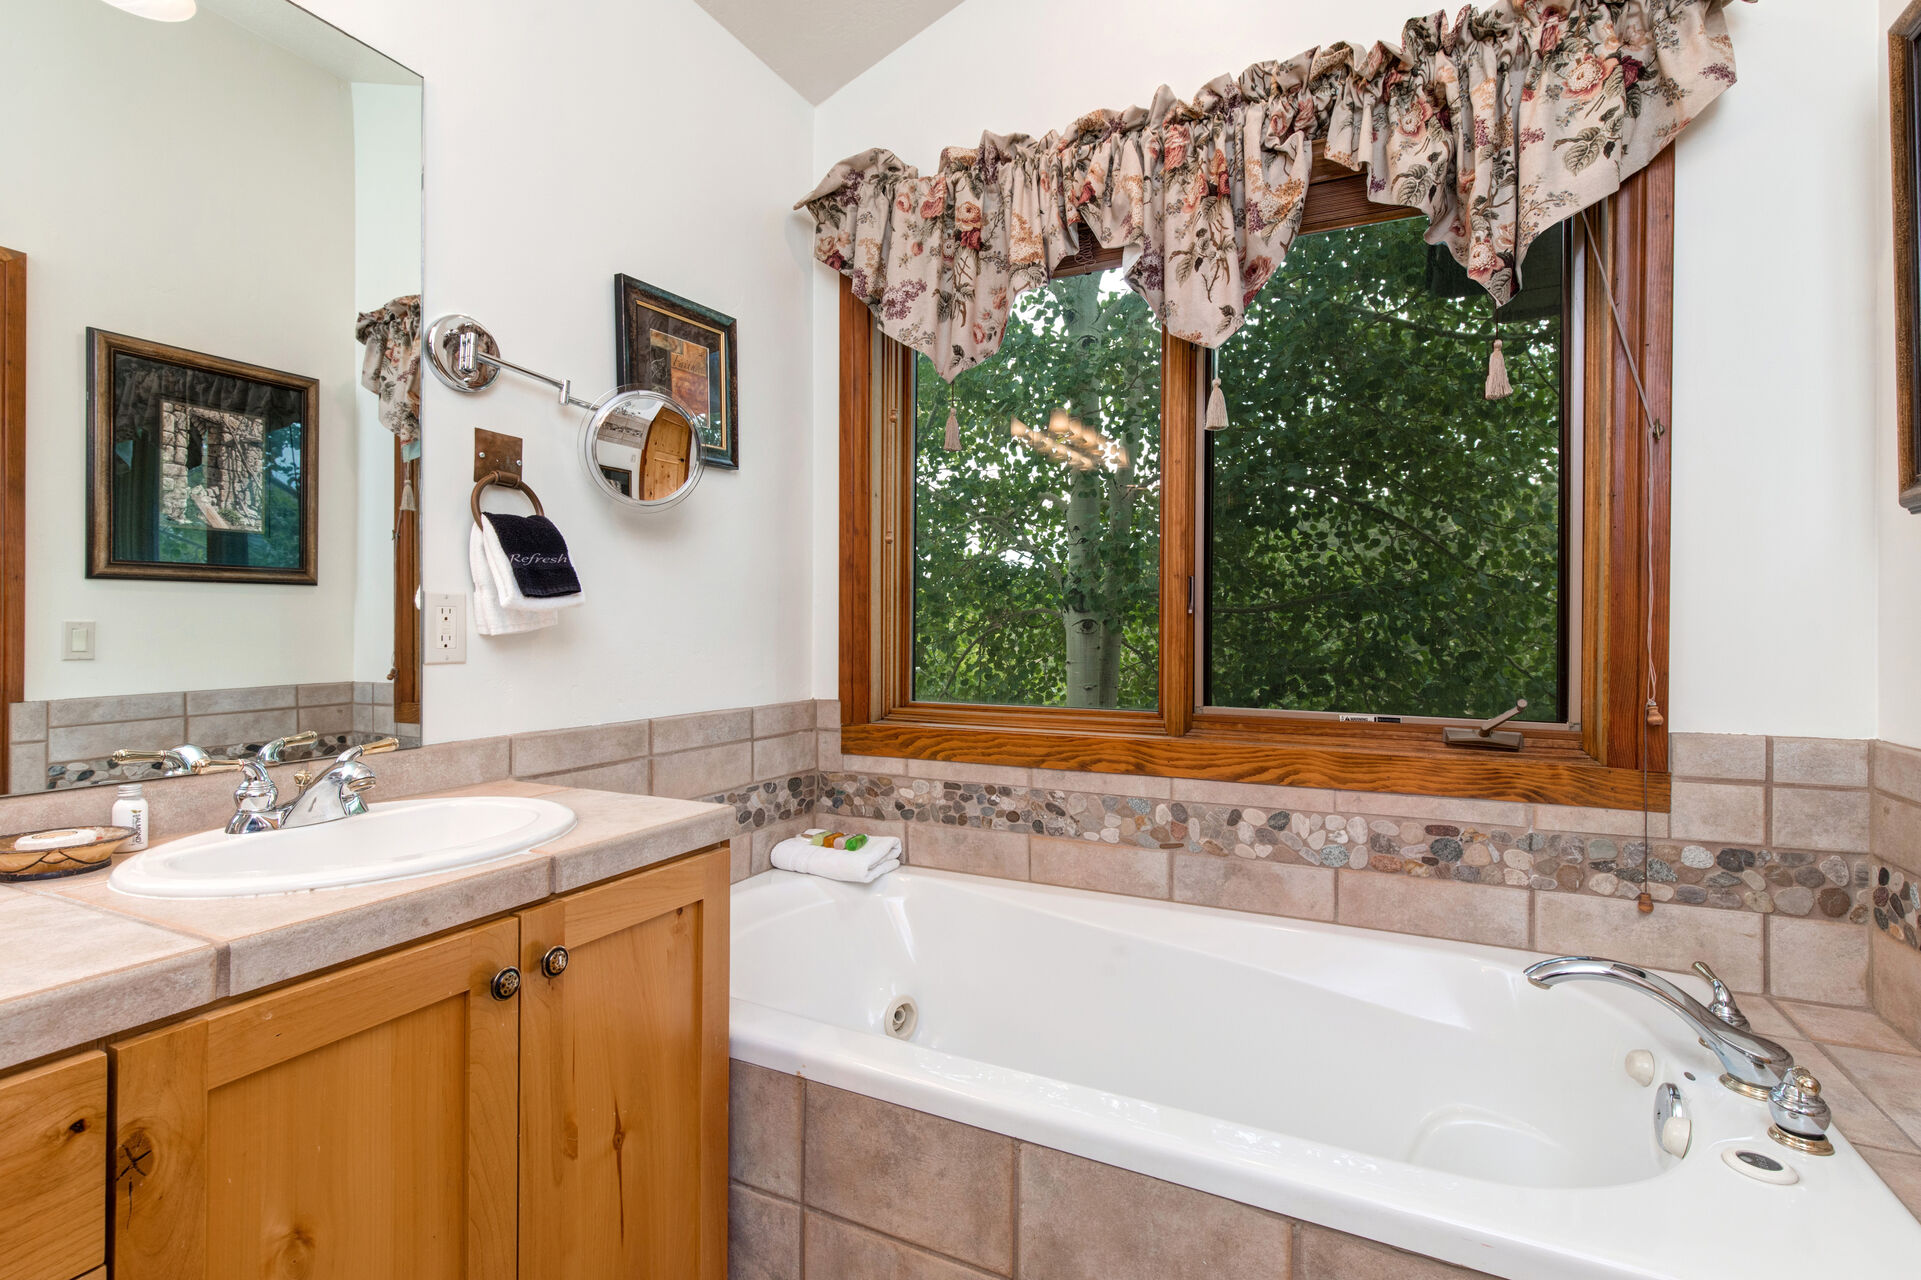 Master Bathroom with double vanities, jetted tub, and glass & tile shower